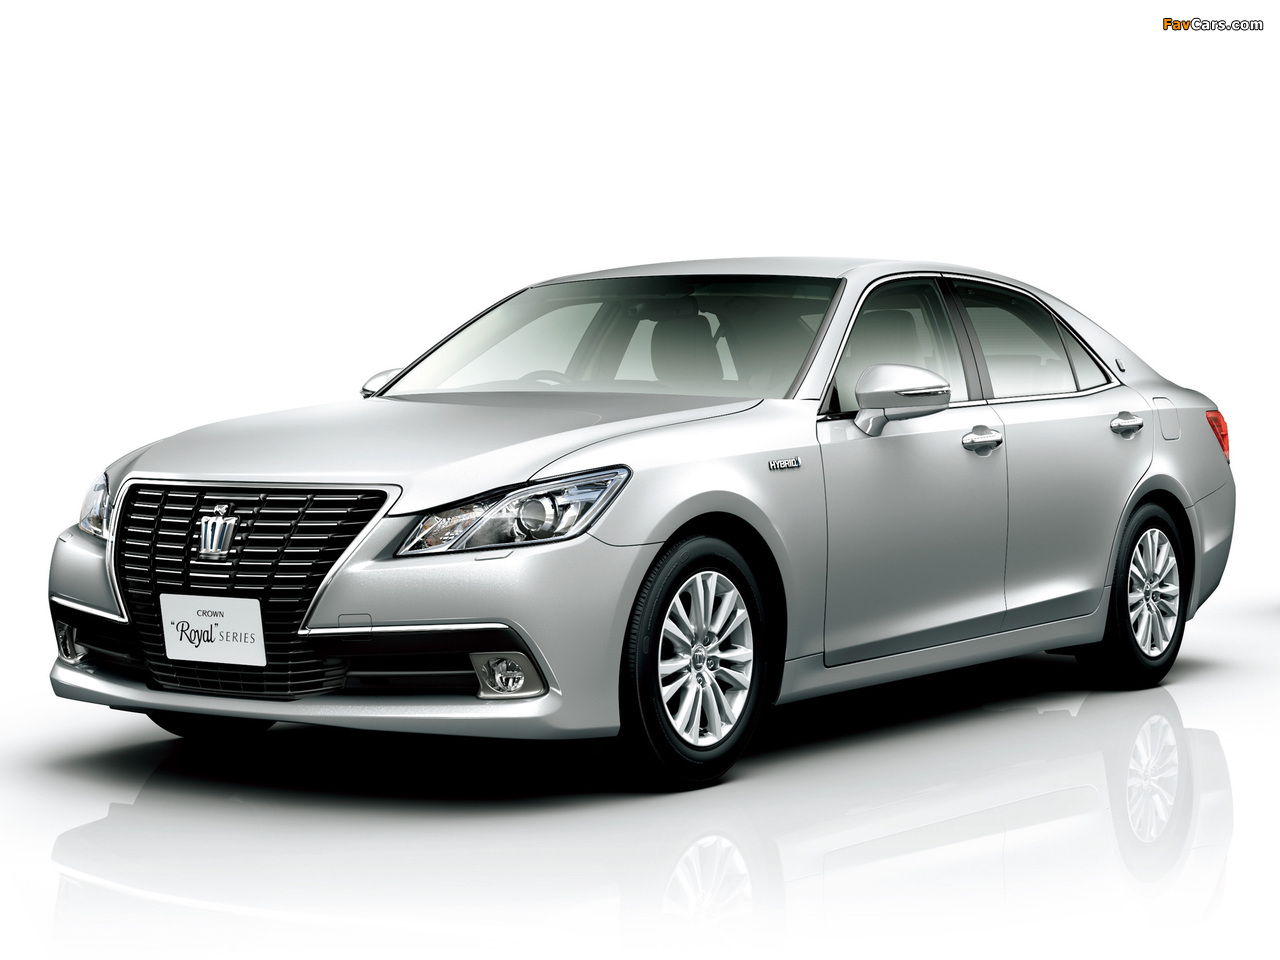 Toyota Crown Hybrid Royal Saloon (S210) 2012 images (1280 x 960)